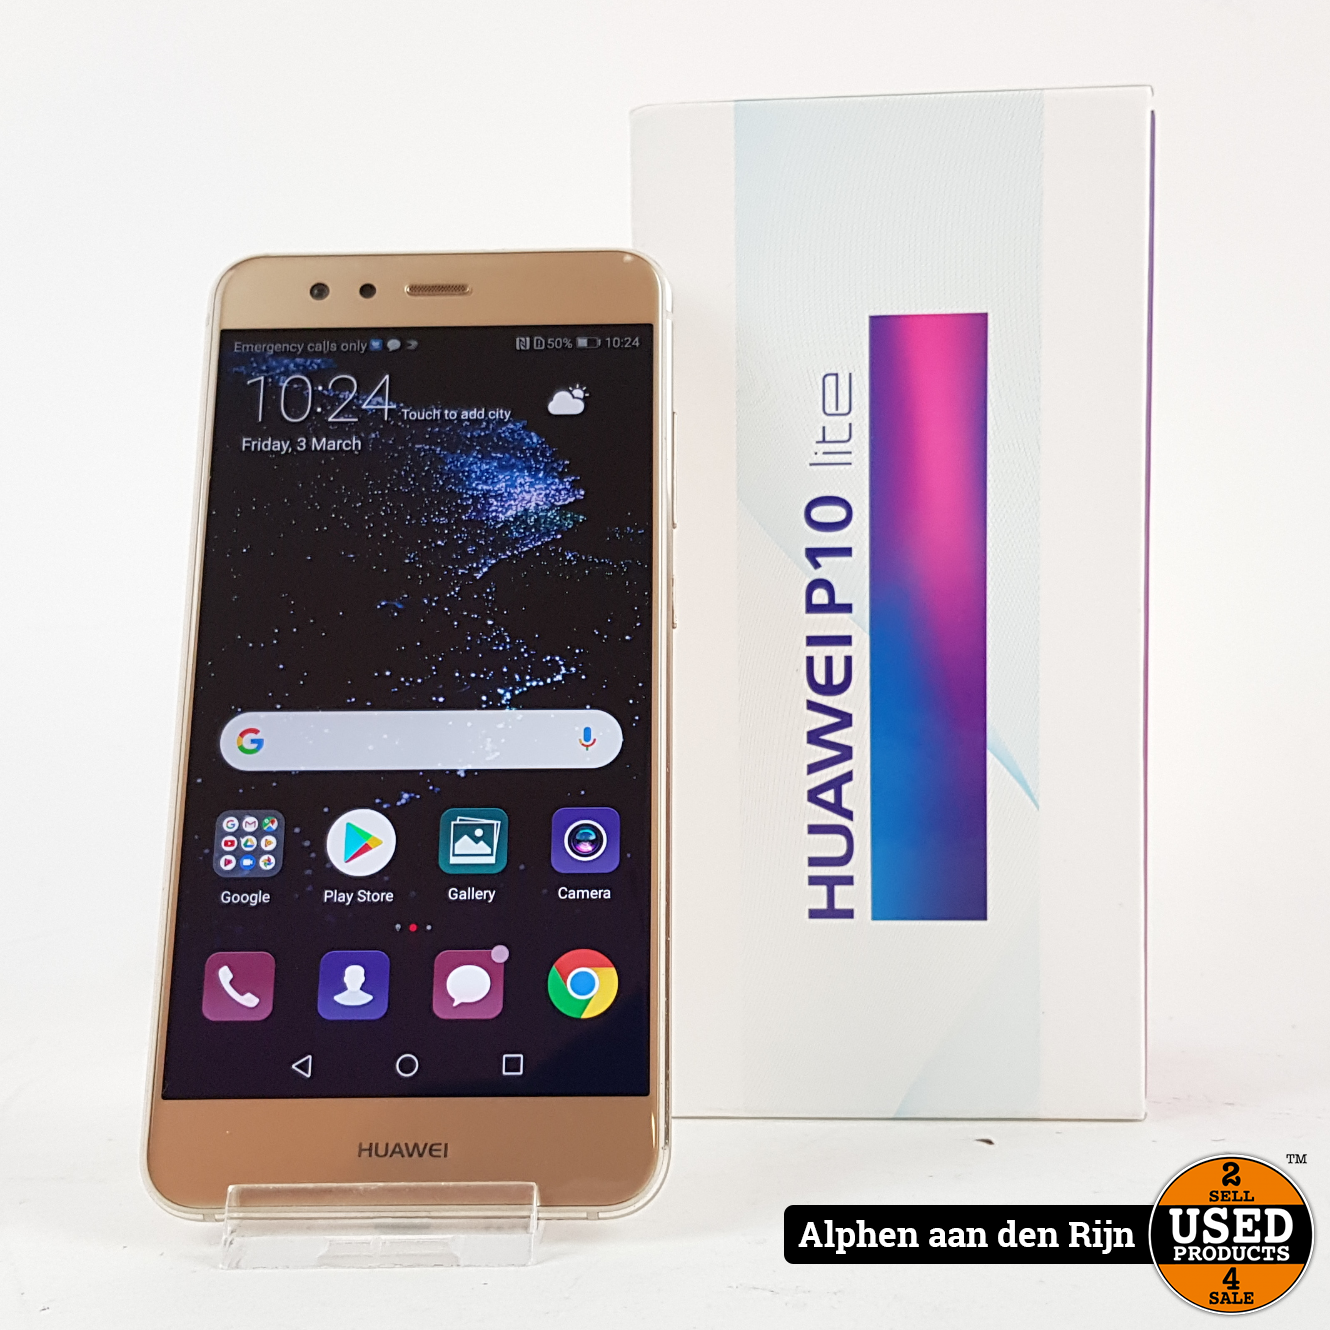 Huawei P10 Lite Platinum Gold 32gb || Android 8 Used Products Alphen aan den Rijn